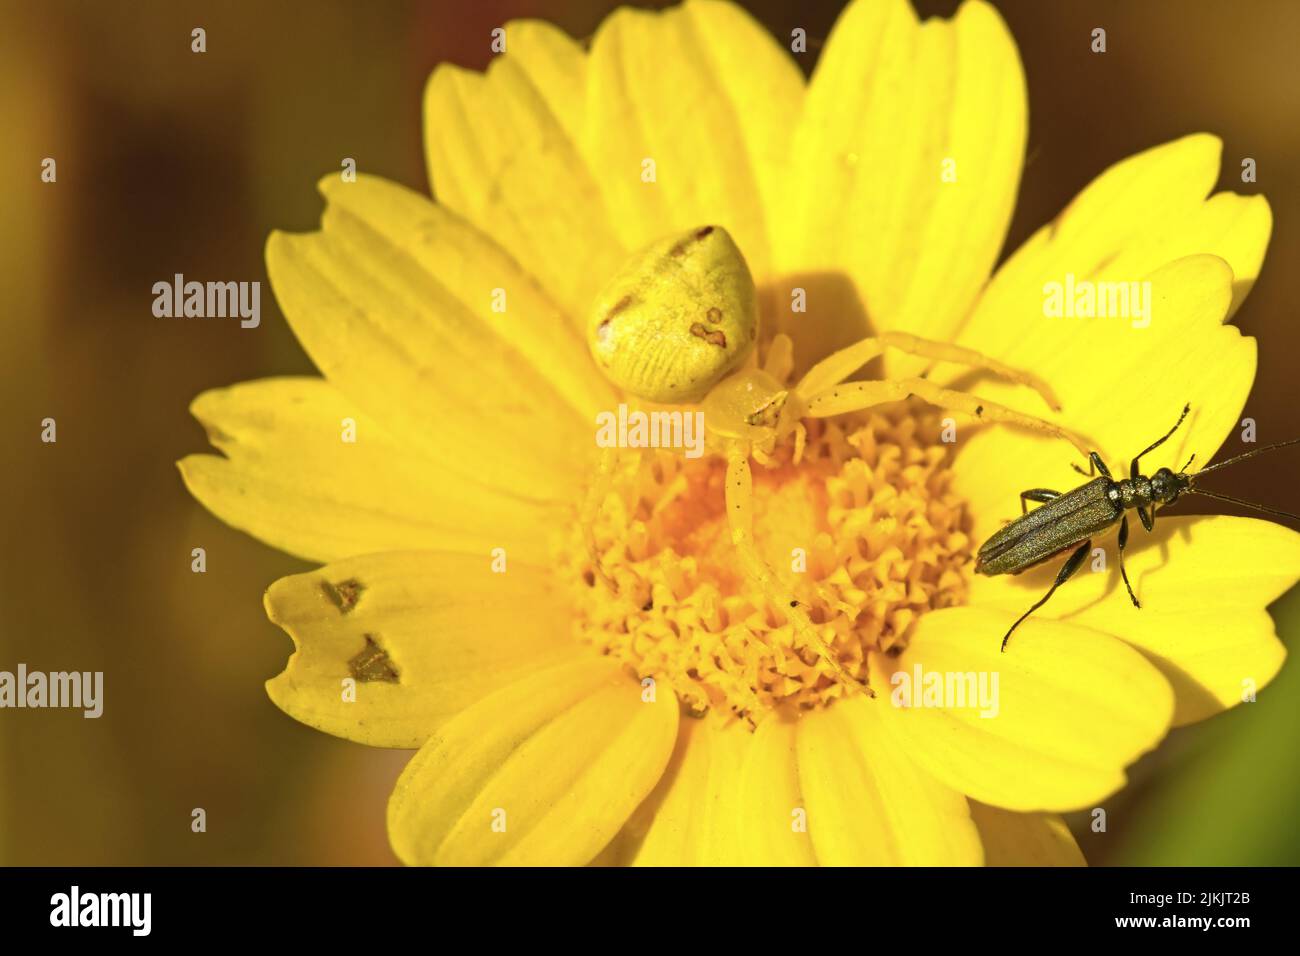 Yellow Crab spider hunts a beetle Stock Photo